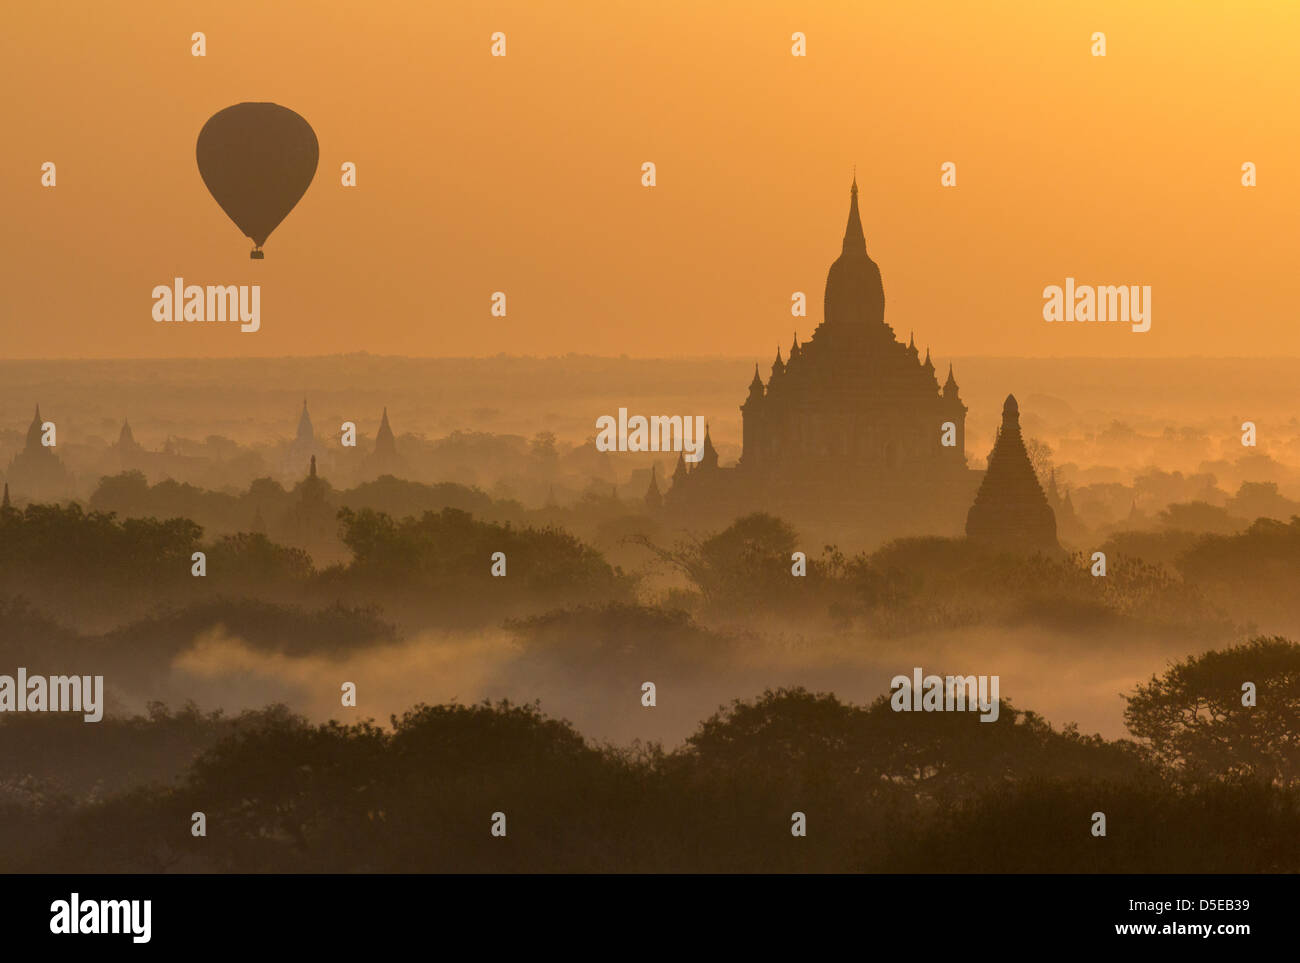 Sunrise with balloons over the pagodas of Bagan, Myanmar 3 Stock Photo